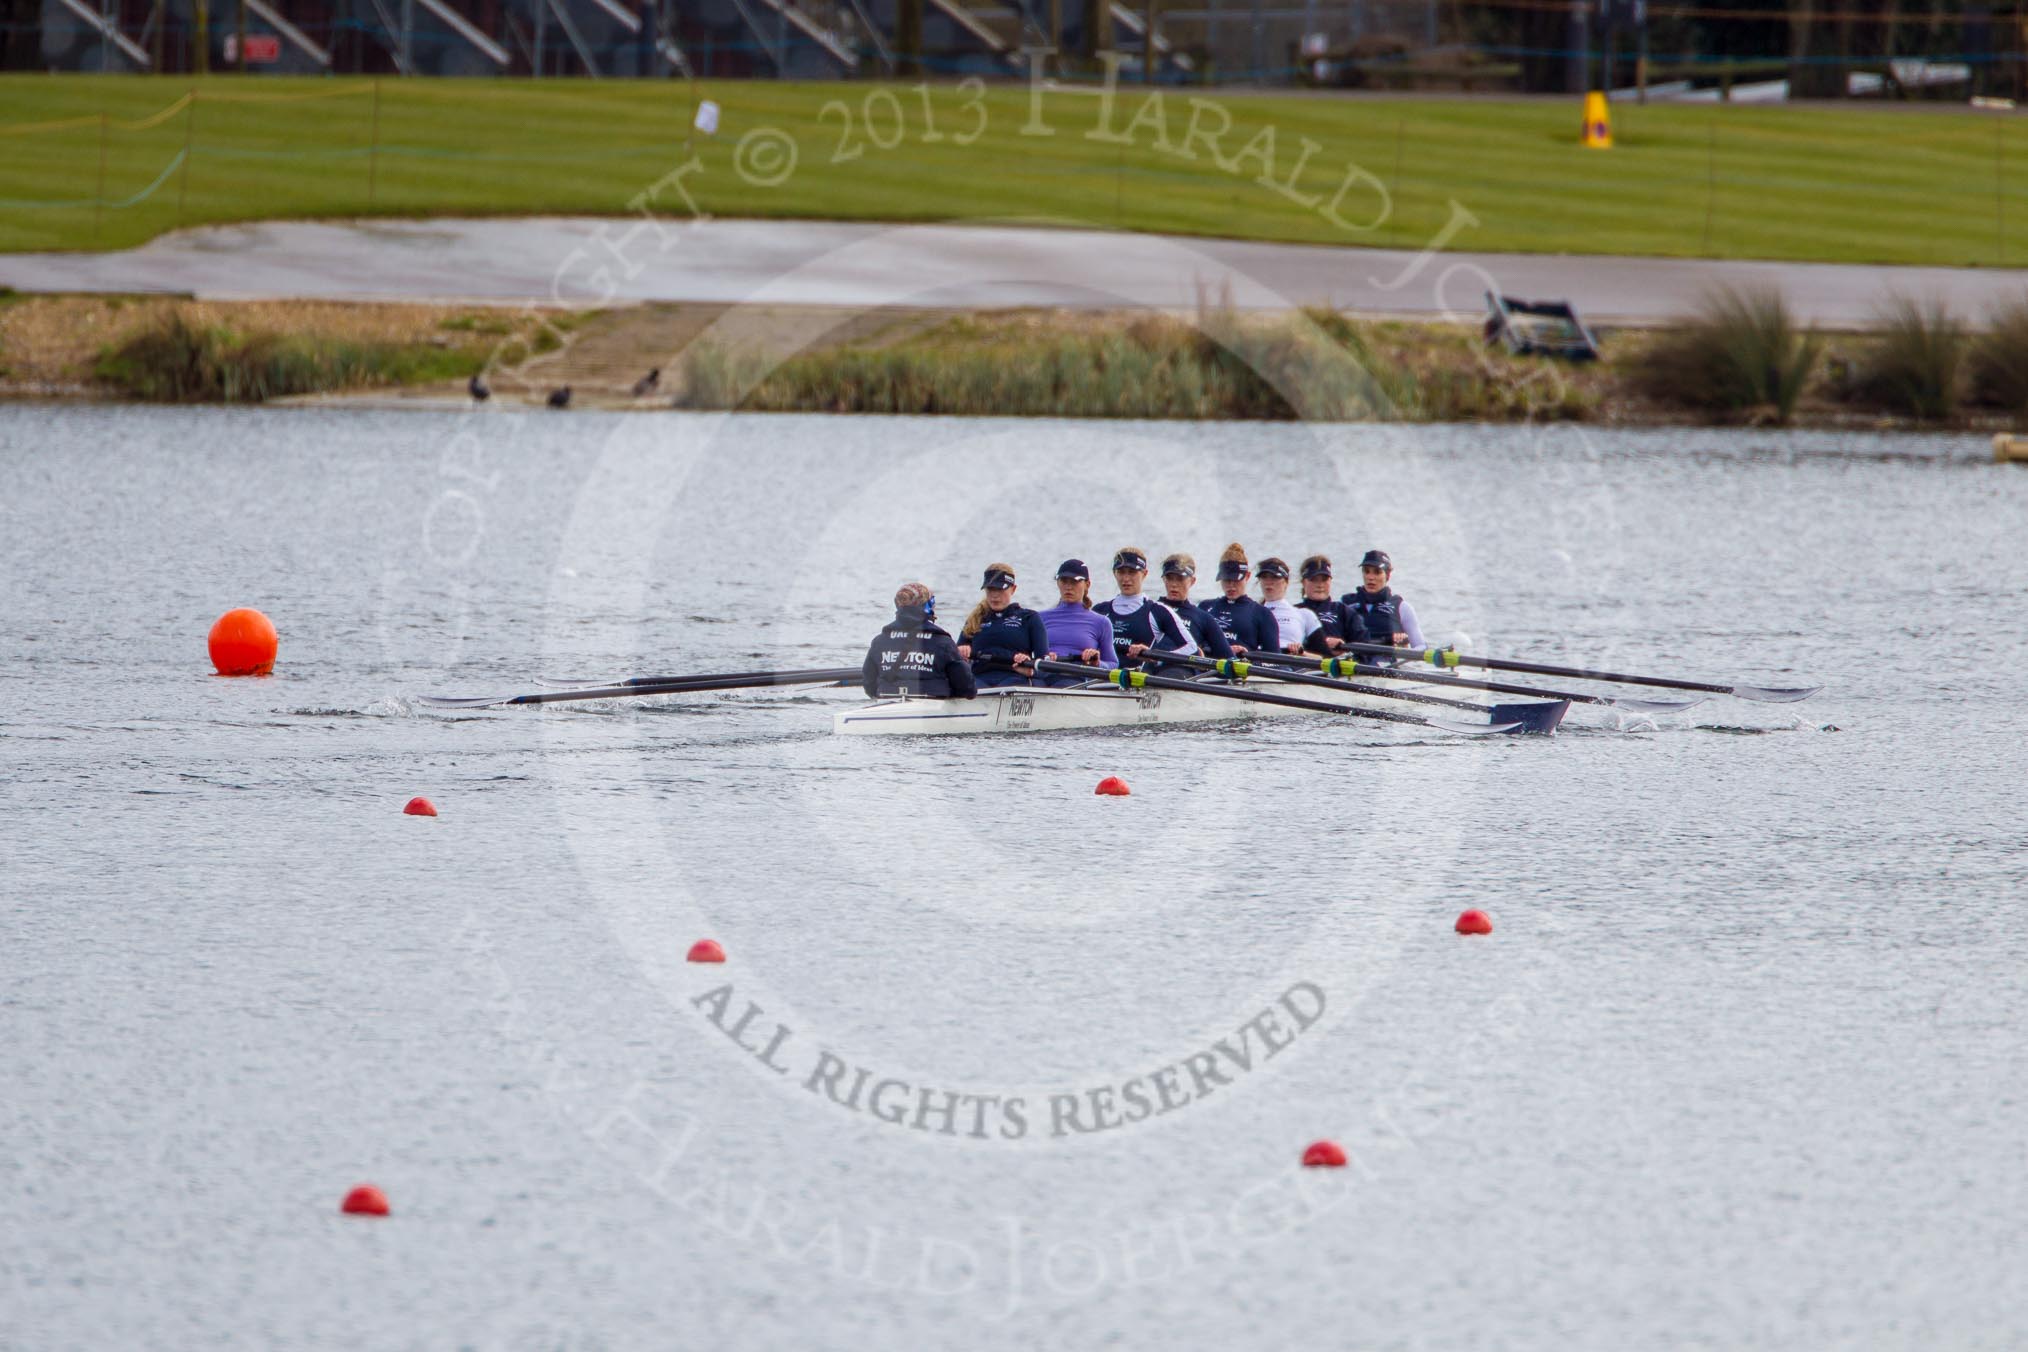 The Boat Race season 2013 - fixture OUWBC vs Olympians: The OUWBC reserve boat Osiris returning to one of the Dorney Lake pontoons after the training session..
Dorney Lake,
Dorney, Windsor,
Buckinghamshire,
United Kingdom,
on 16 March 2013 at 12:31, image #329